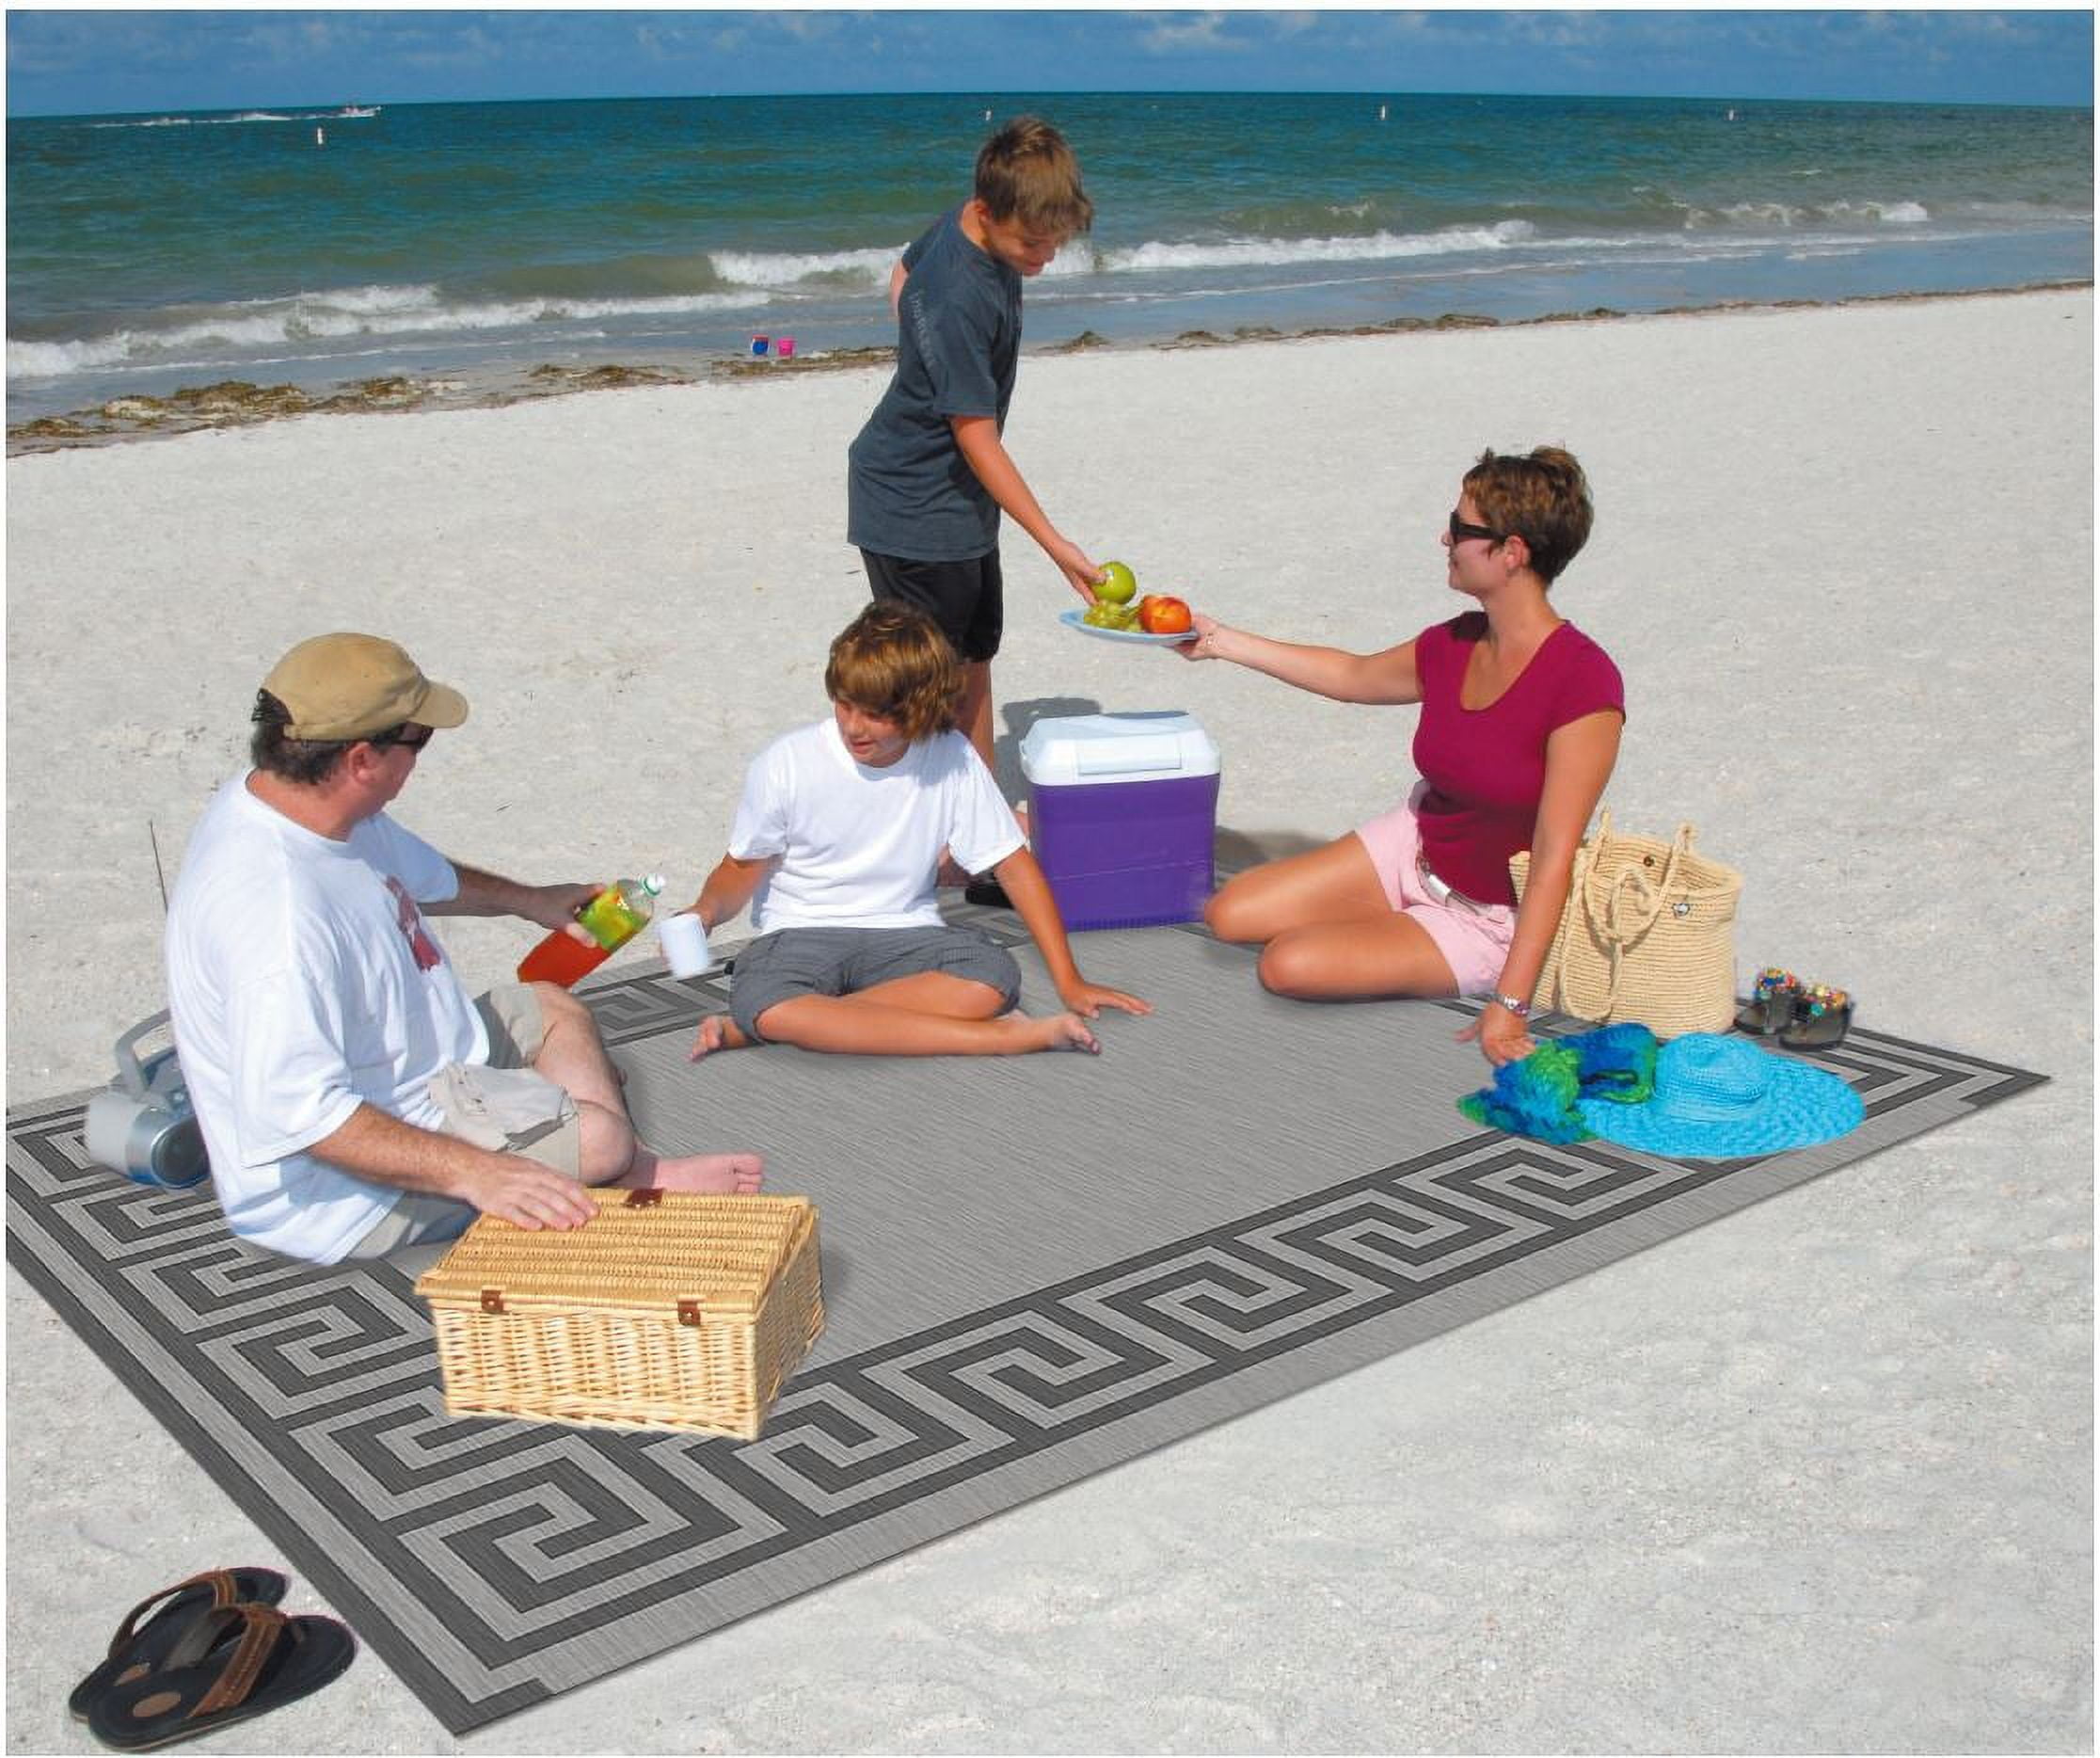 Glamplife 9x12 RV Rug | Blue and White RV mat | Outdoor Mats for Patio |  Portable Outdoor Area Rugs | Outdoor Rugs 9x12 for Patios Clearance |  Outdoor